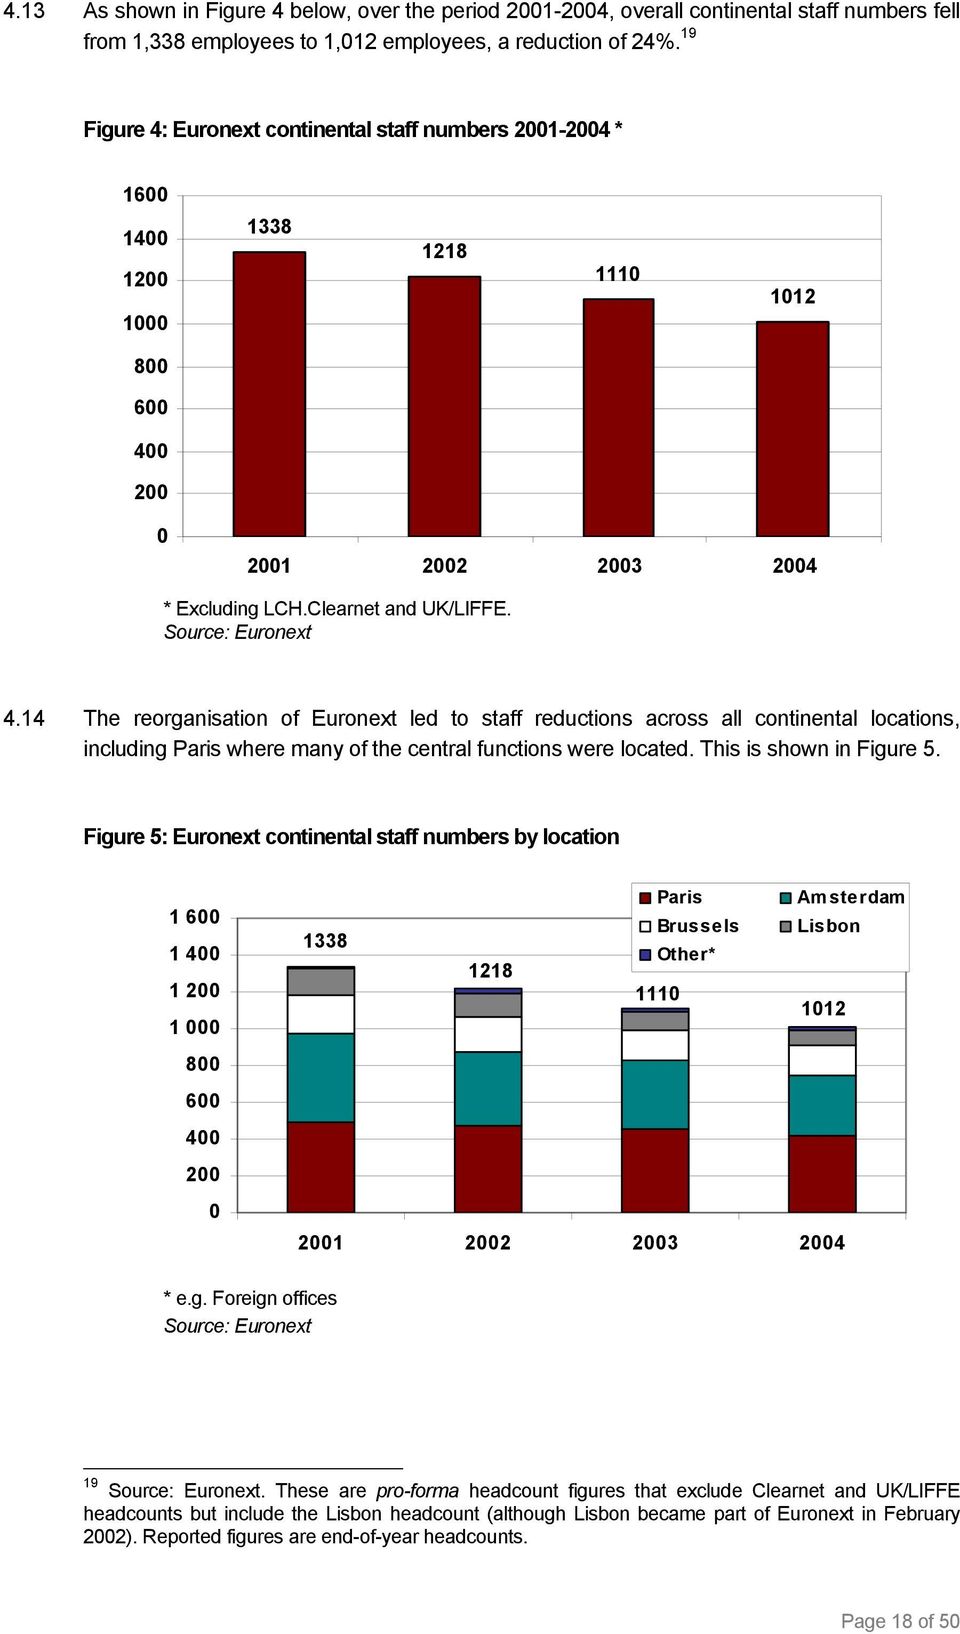 14 The reorganisation of Euronext led to staff reductions across all continental locations, including Paris where many of the central functions were located. This is shown in Figure 5.